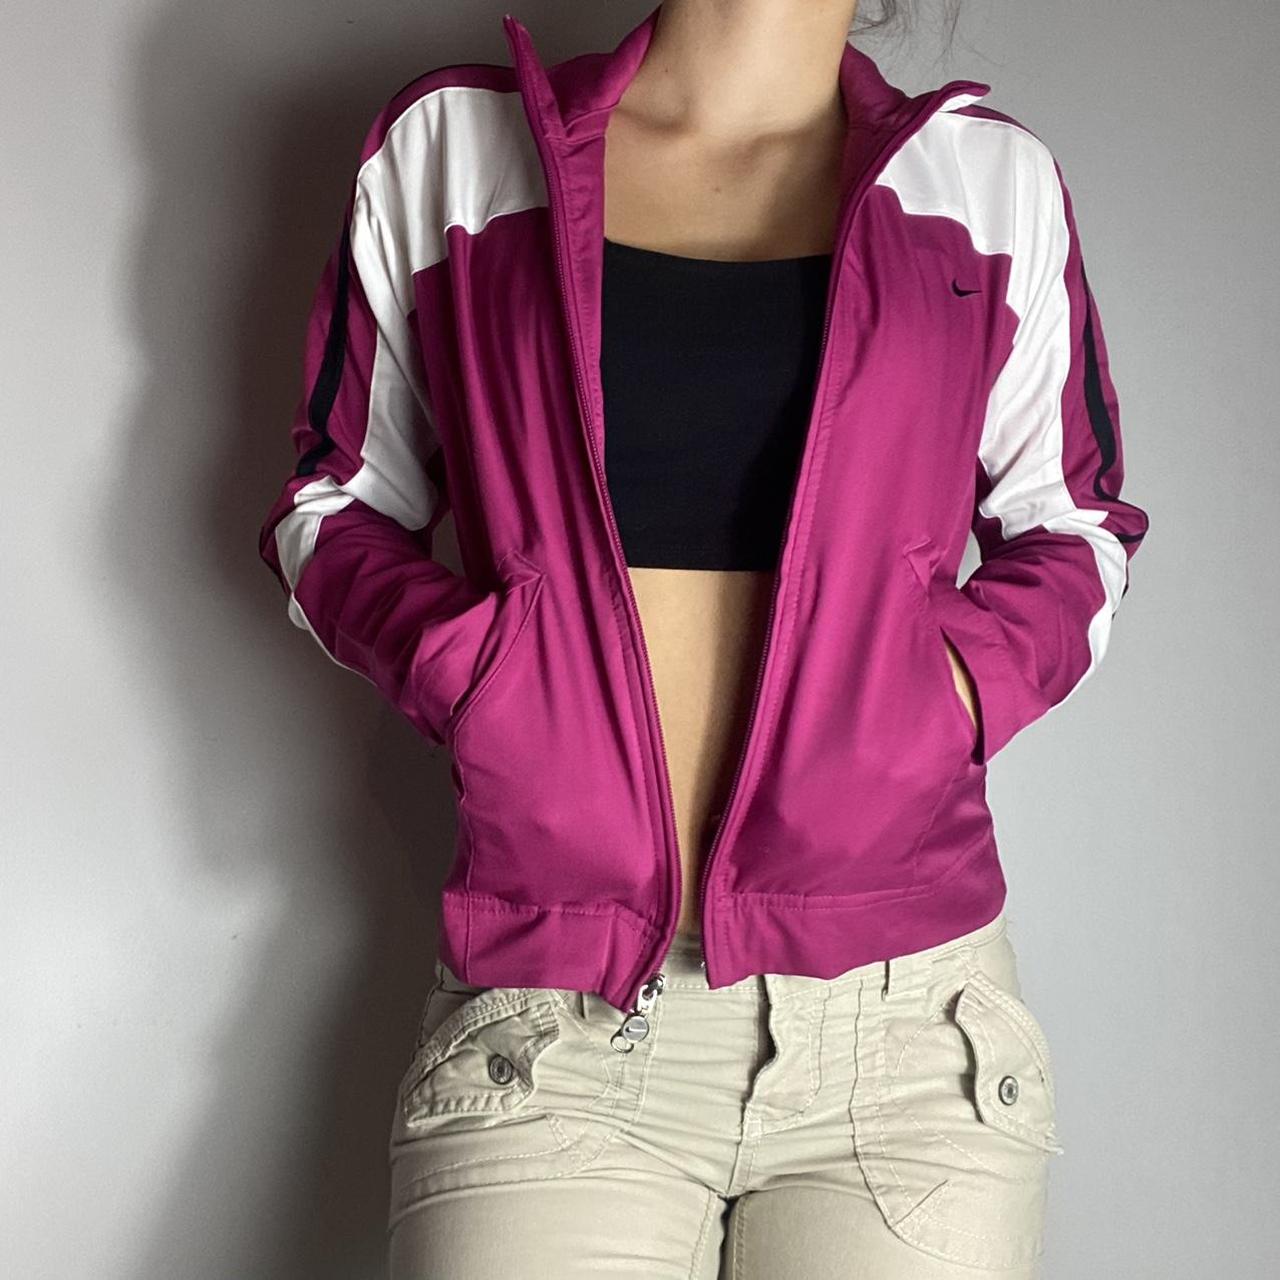 Nike Women's Pink and White Jacket (4)